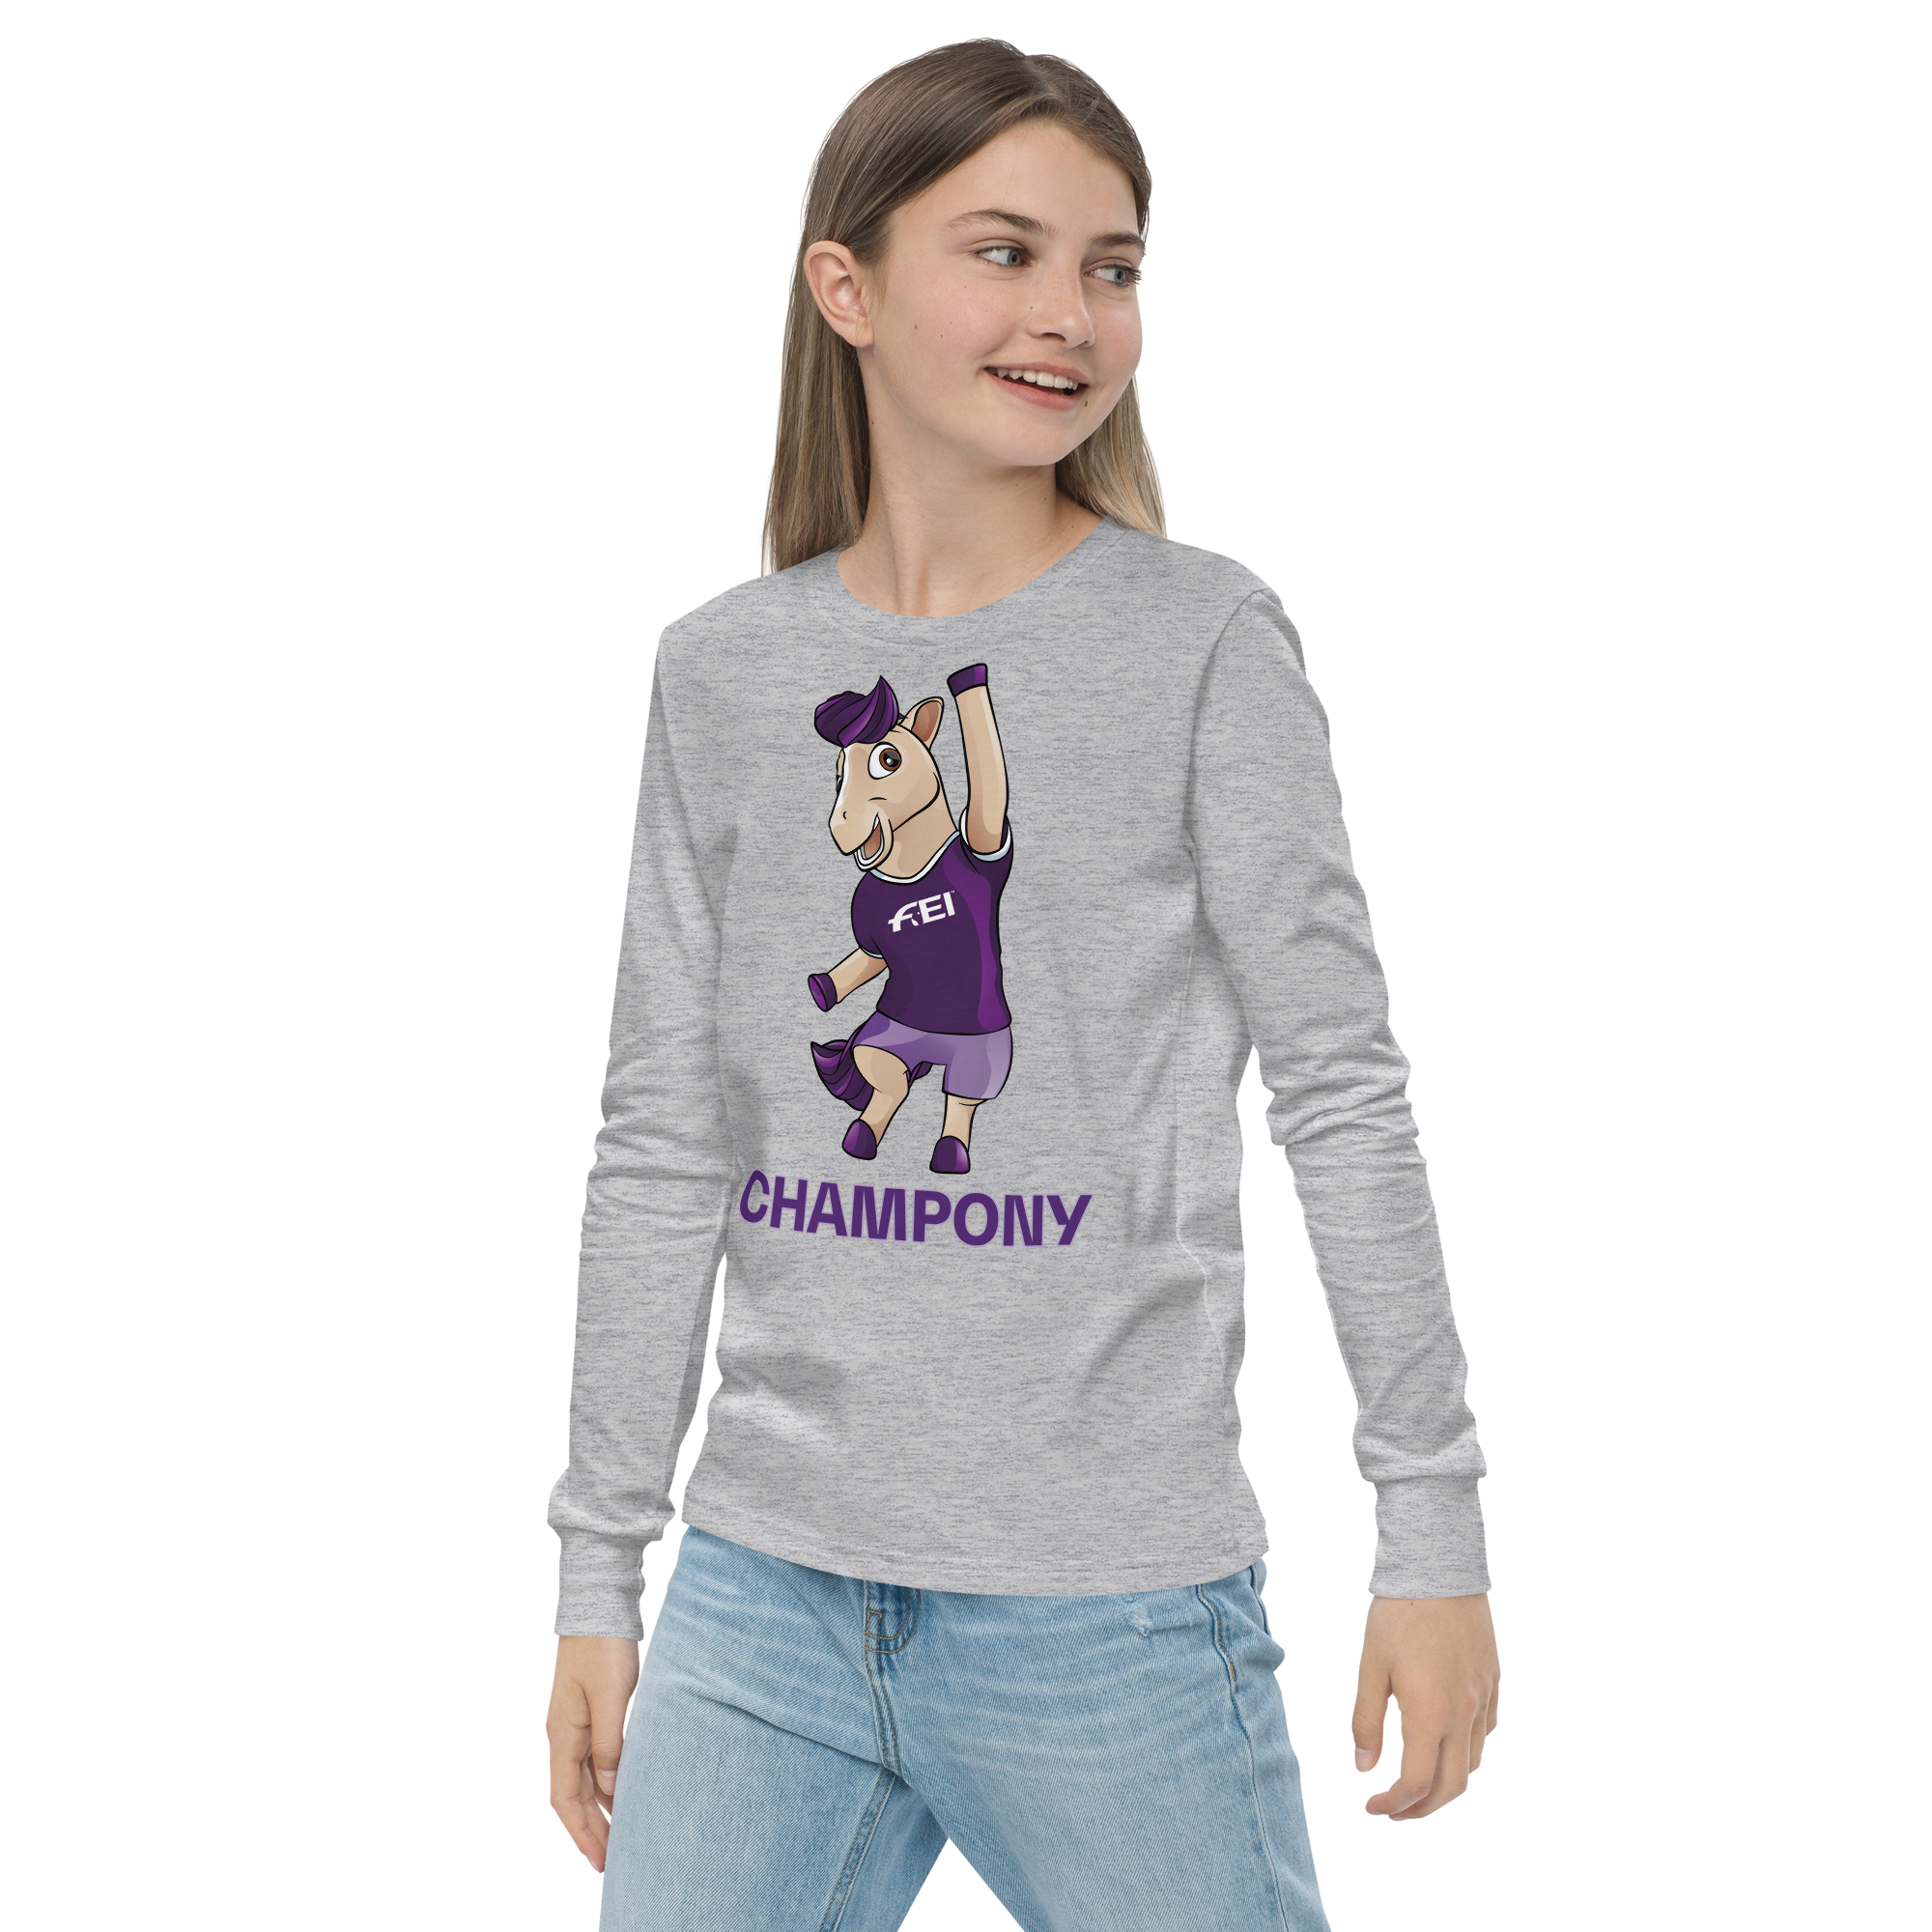 FEI Champony Youth Long Sleeve FEI Official Store